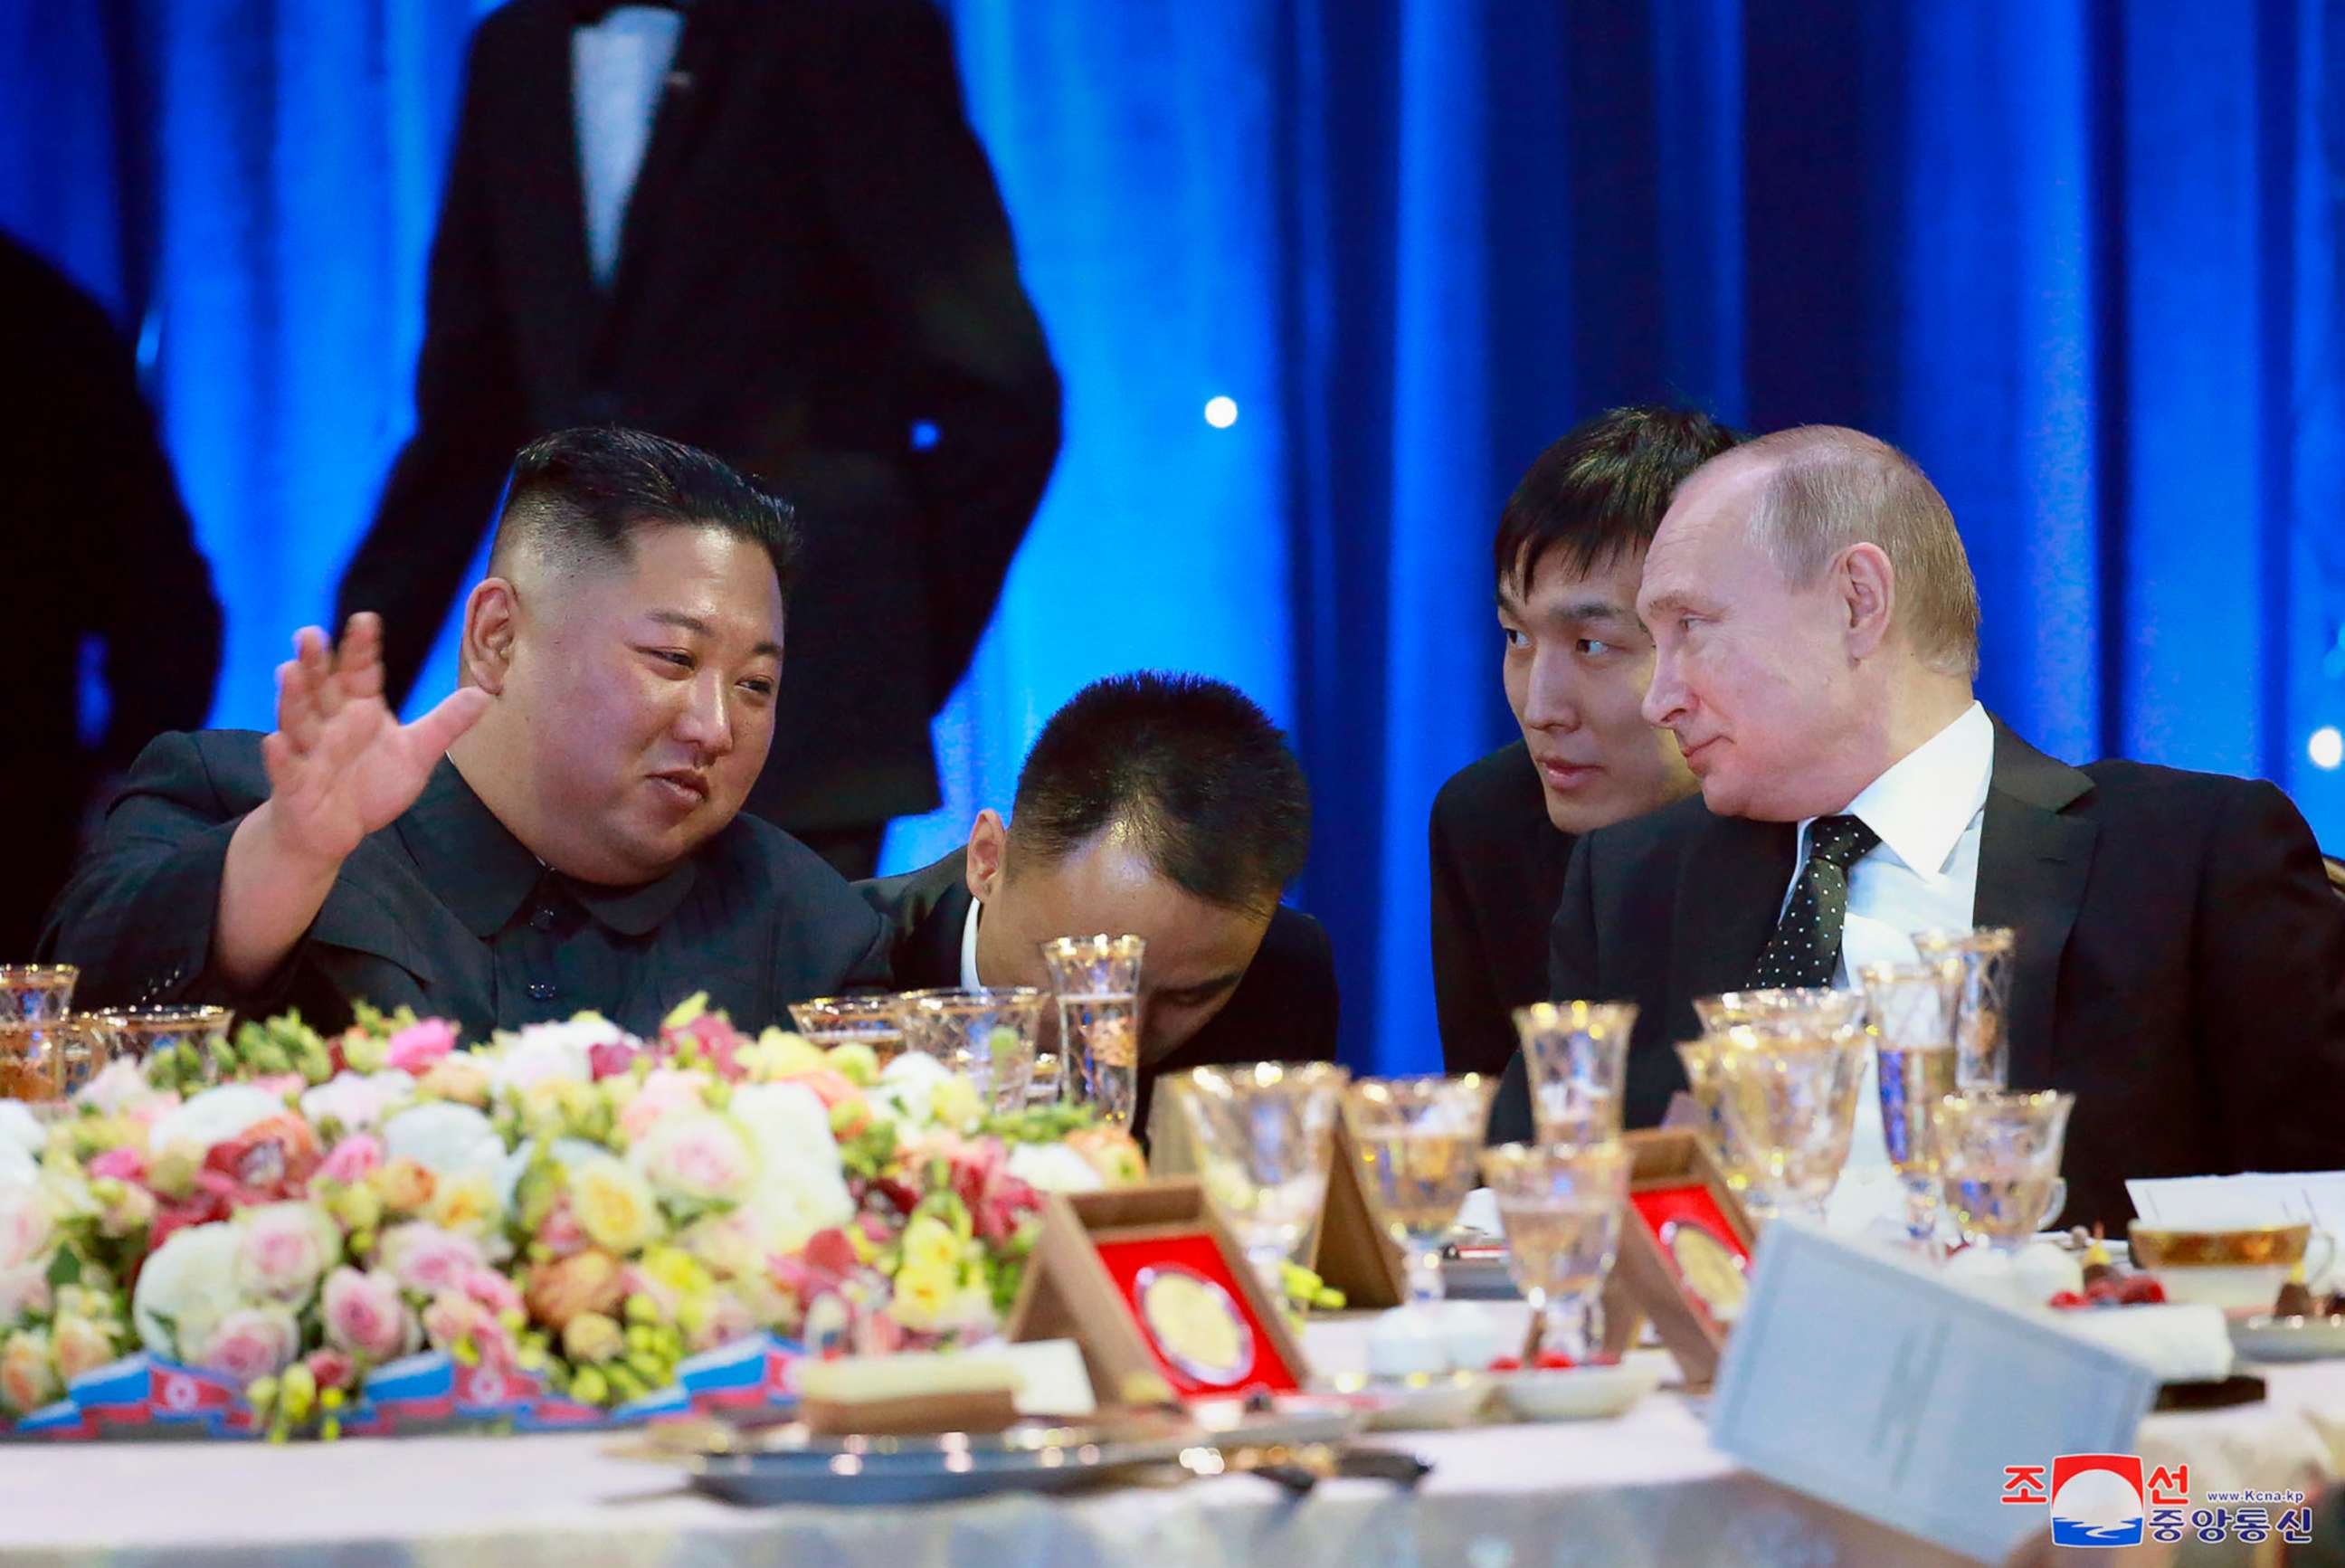 PHOTO: North Korean leader Kim Jong Un, left, speaks with Russian President Vladimir Putin in Vladivostok, Russia, April 25, 2019 in a photo provided by the North Korean government.